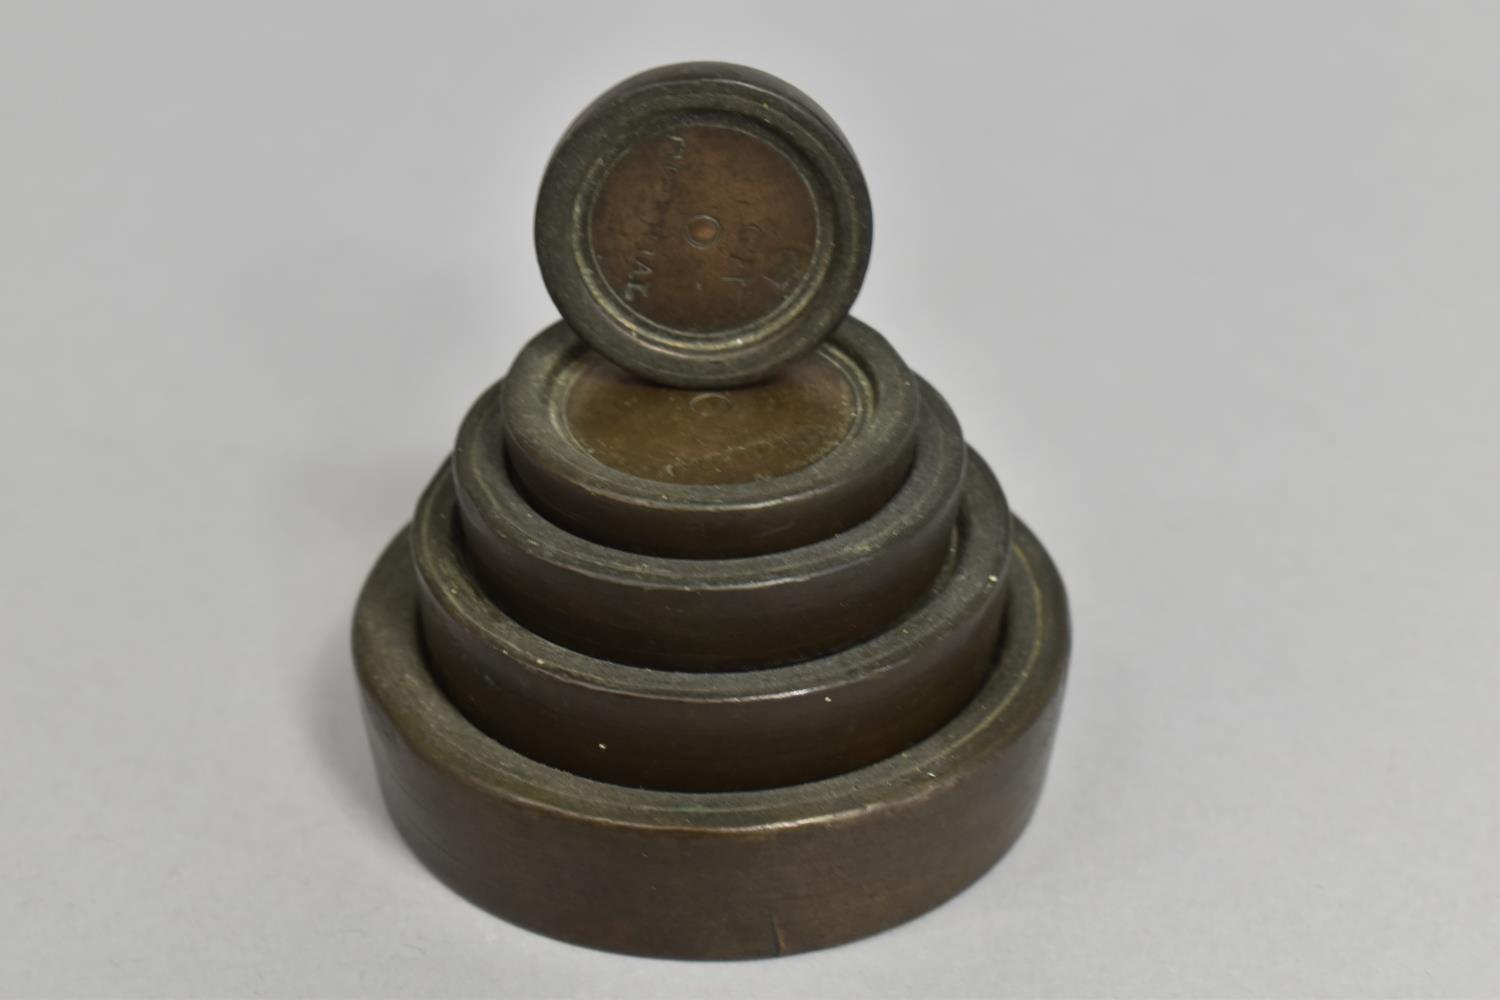 A Set of Five Vintage Circular Scale Weights, Imperial For George V - Image 2 of 6